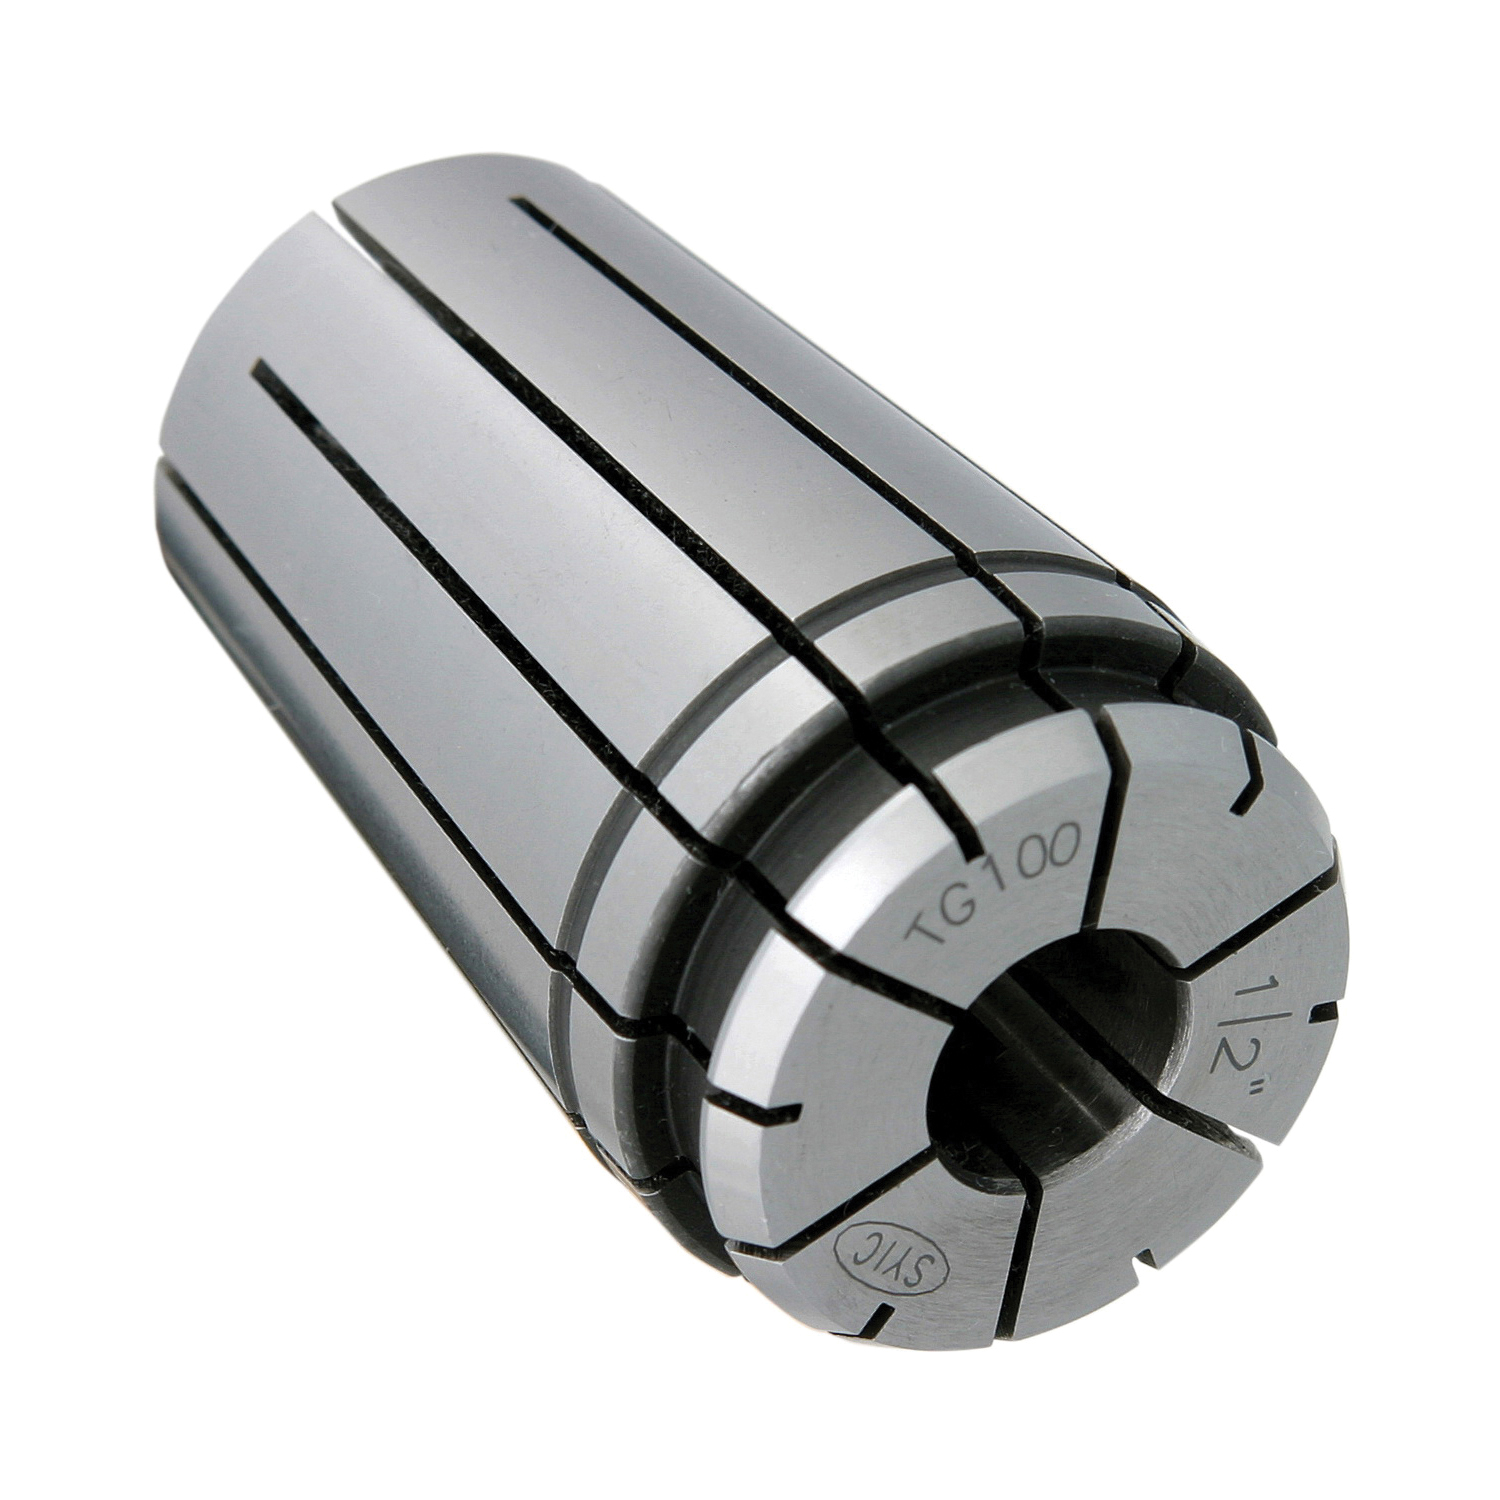 TG100 7/64" COLLET